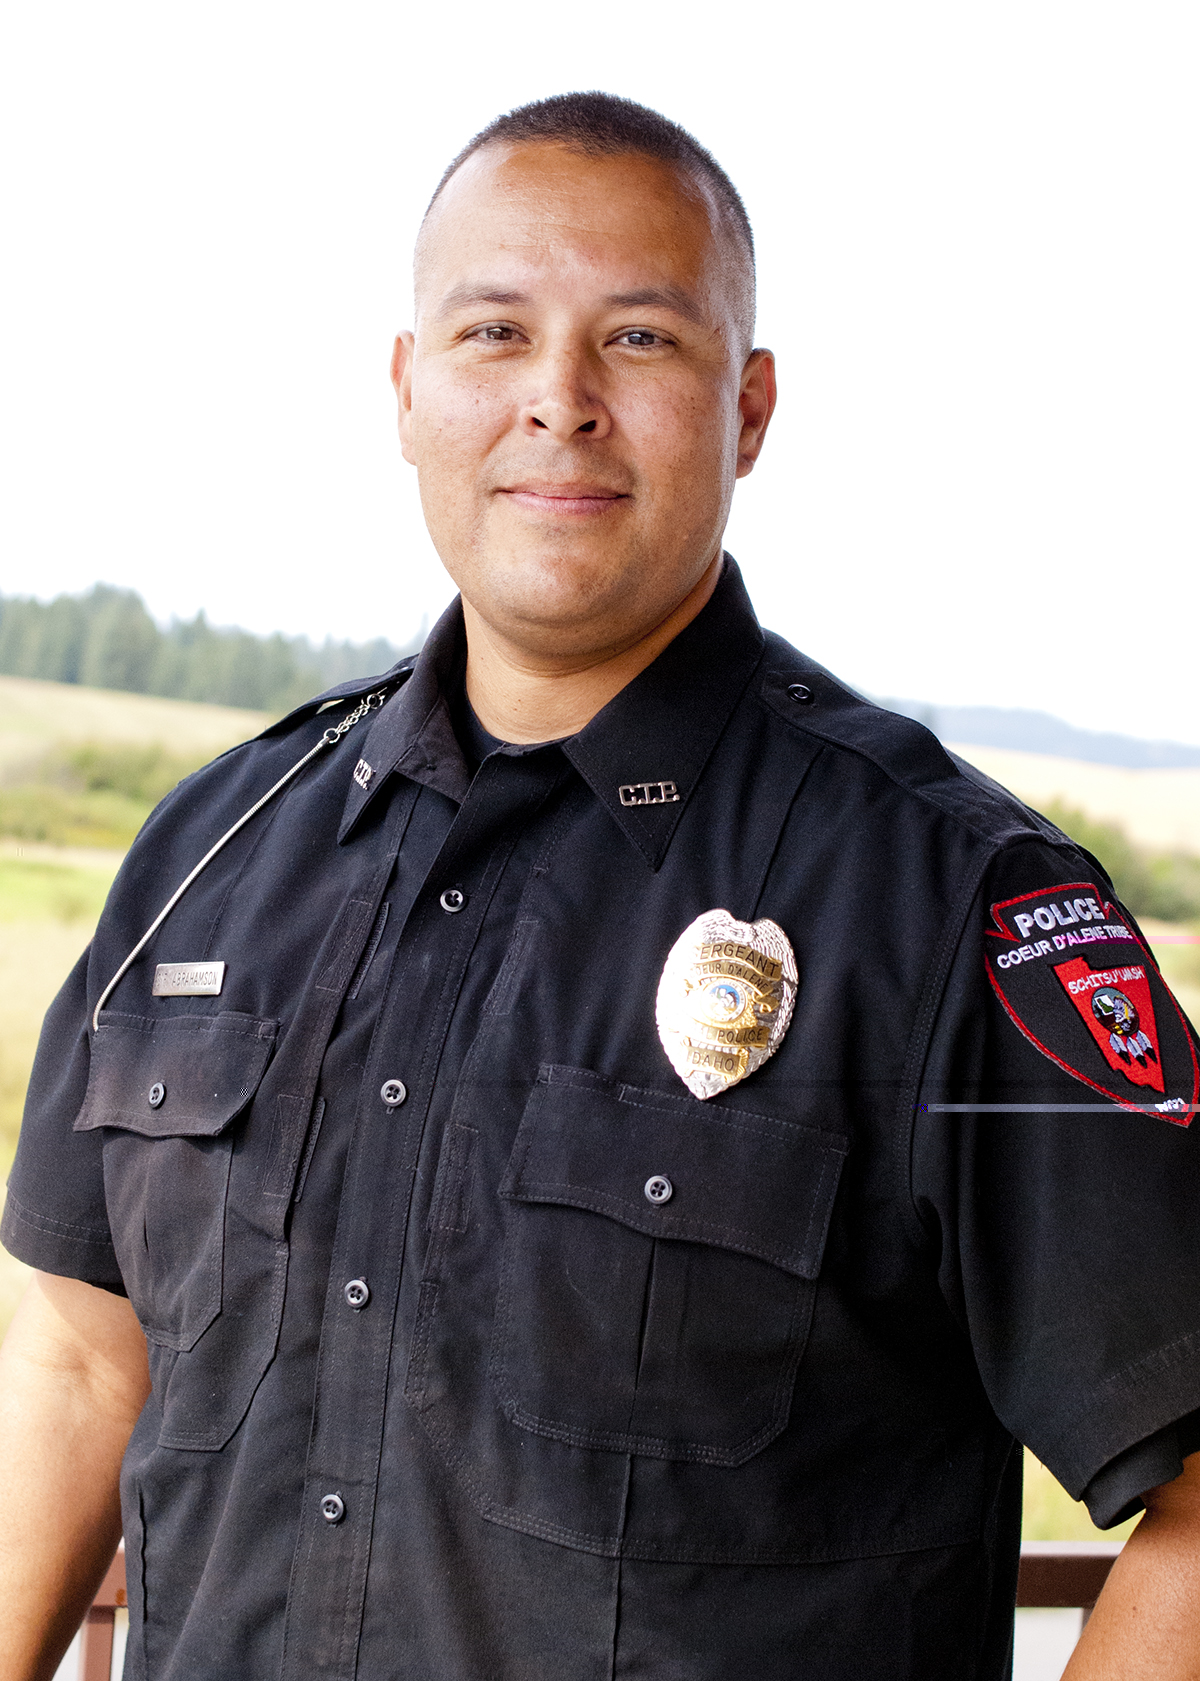 Coeur Dalene Tribe Hires New Police Chief 6668